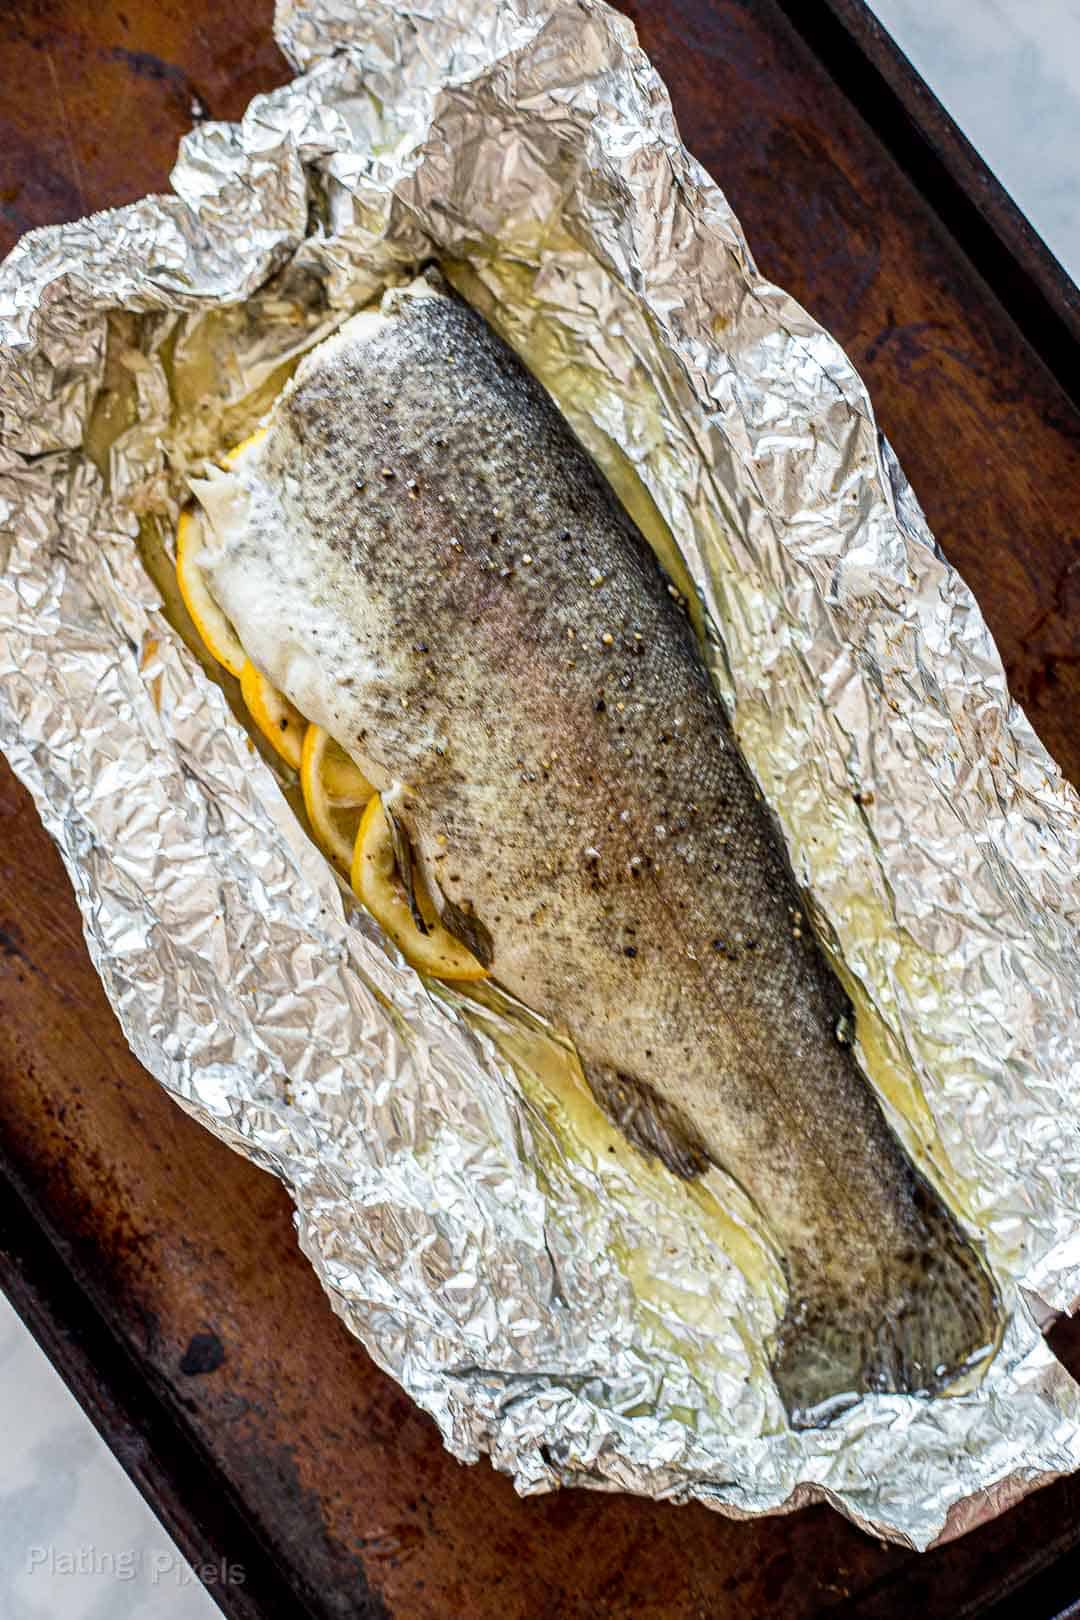 Oven baked trout with head removed on a baking sheet